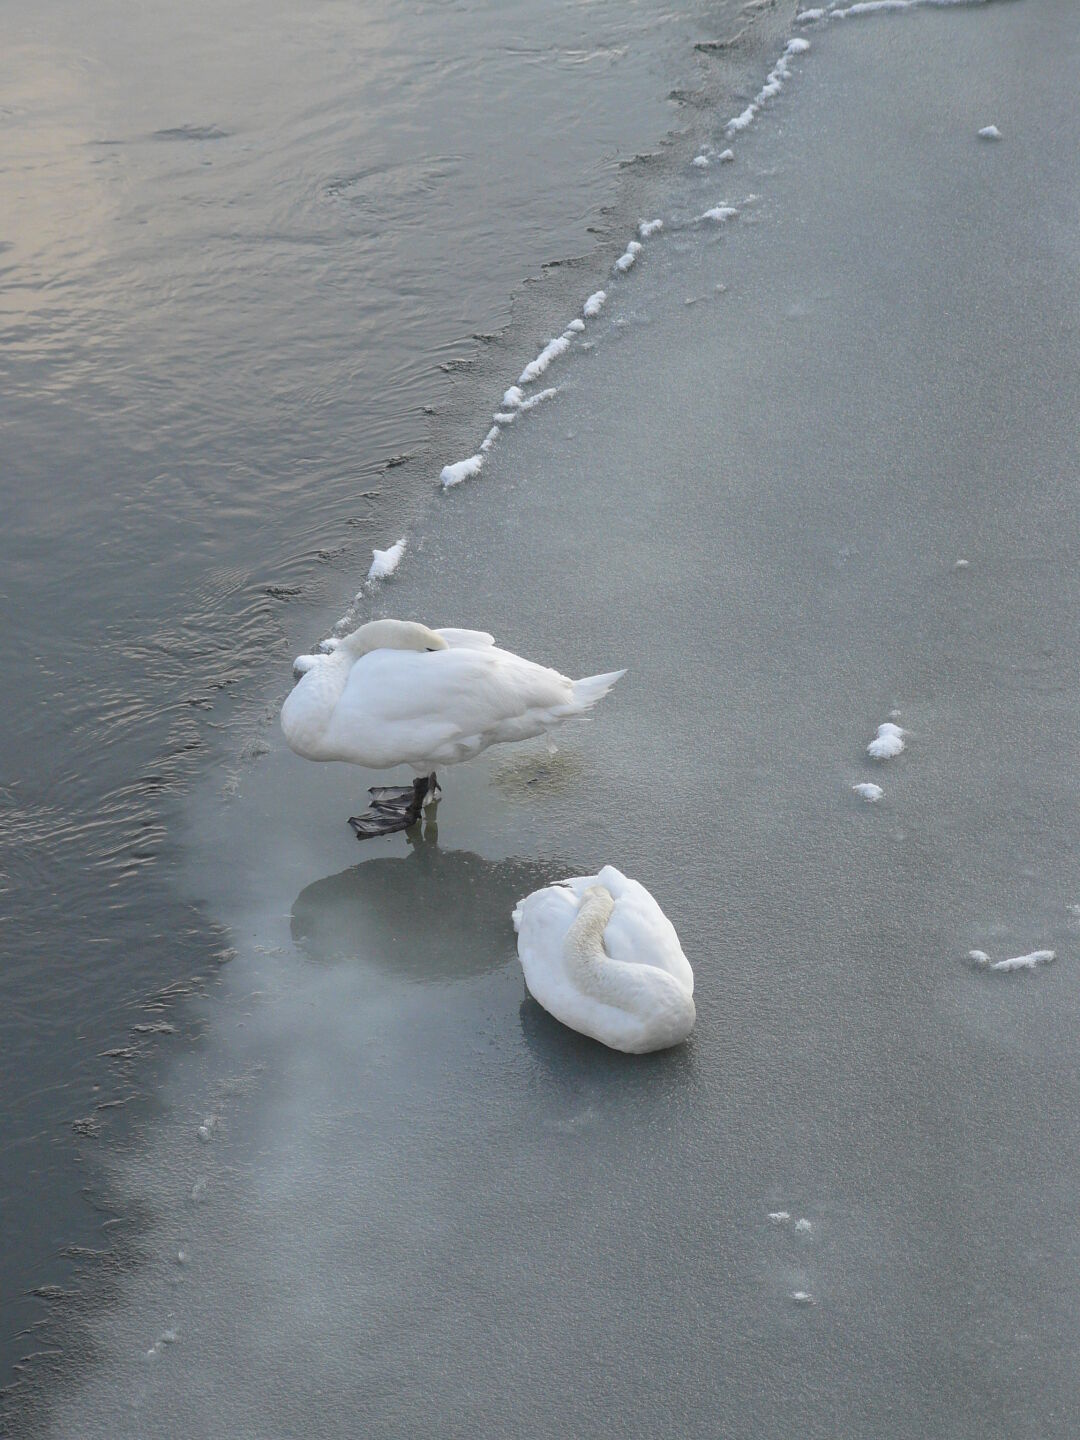 ...which allows these swans to rest safely.